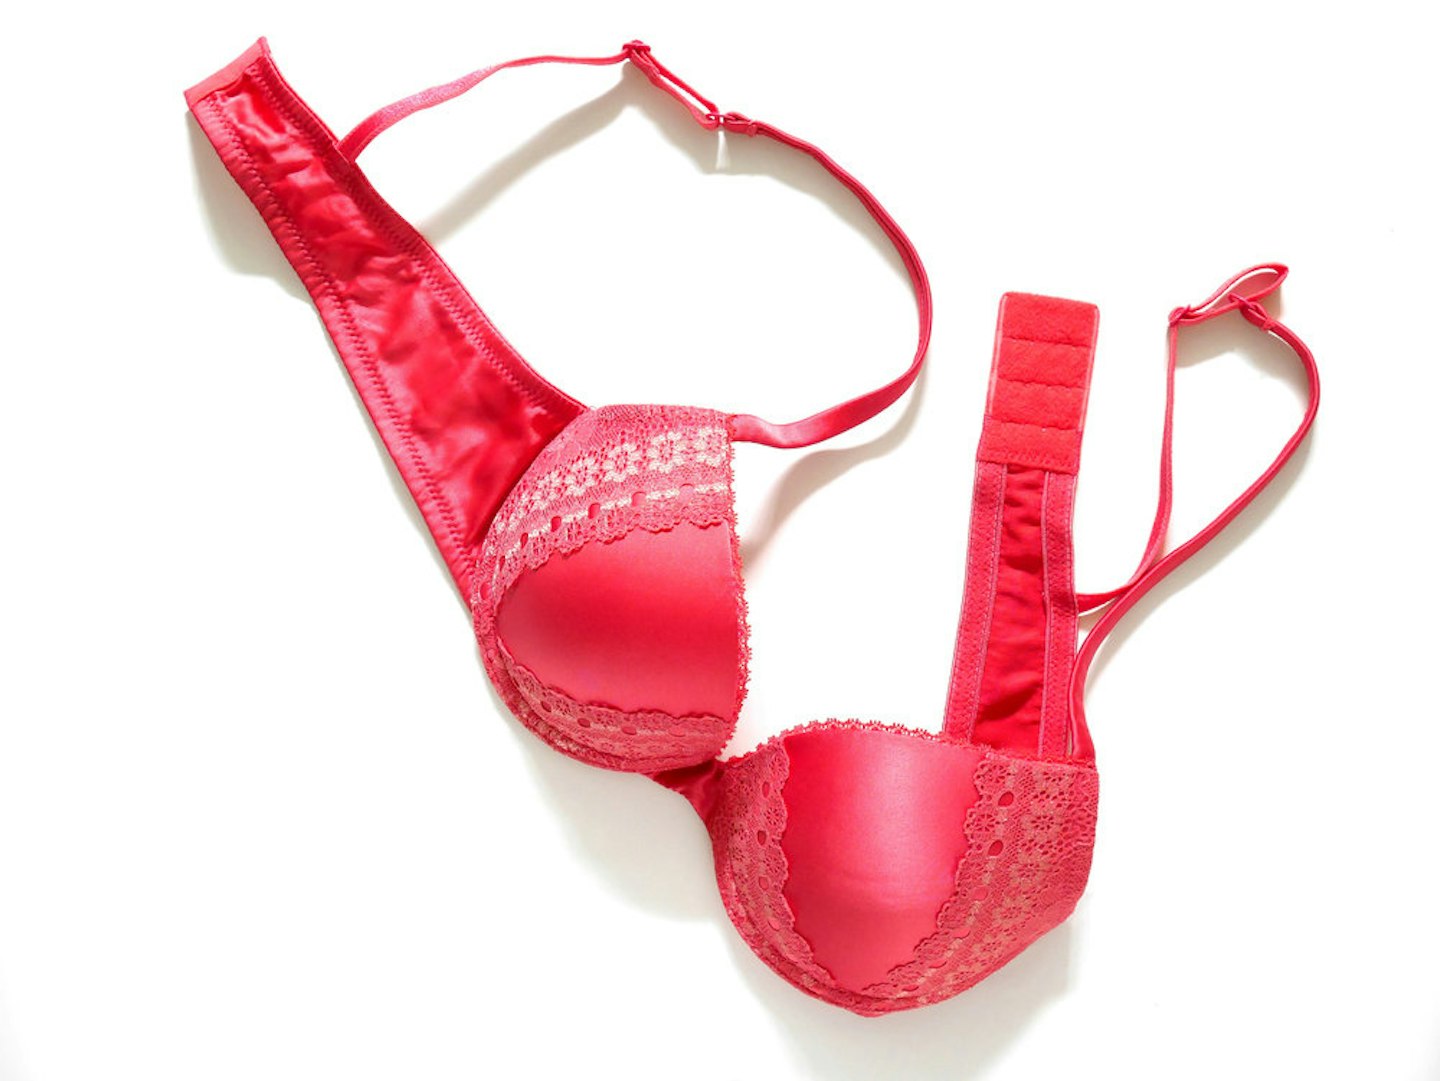 Everything you need to know about bra fittings